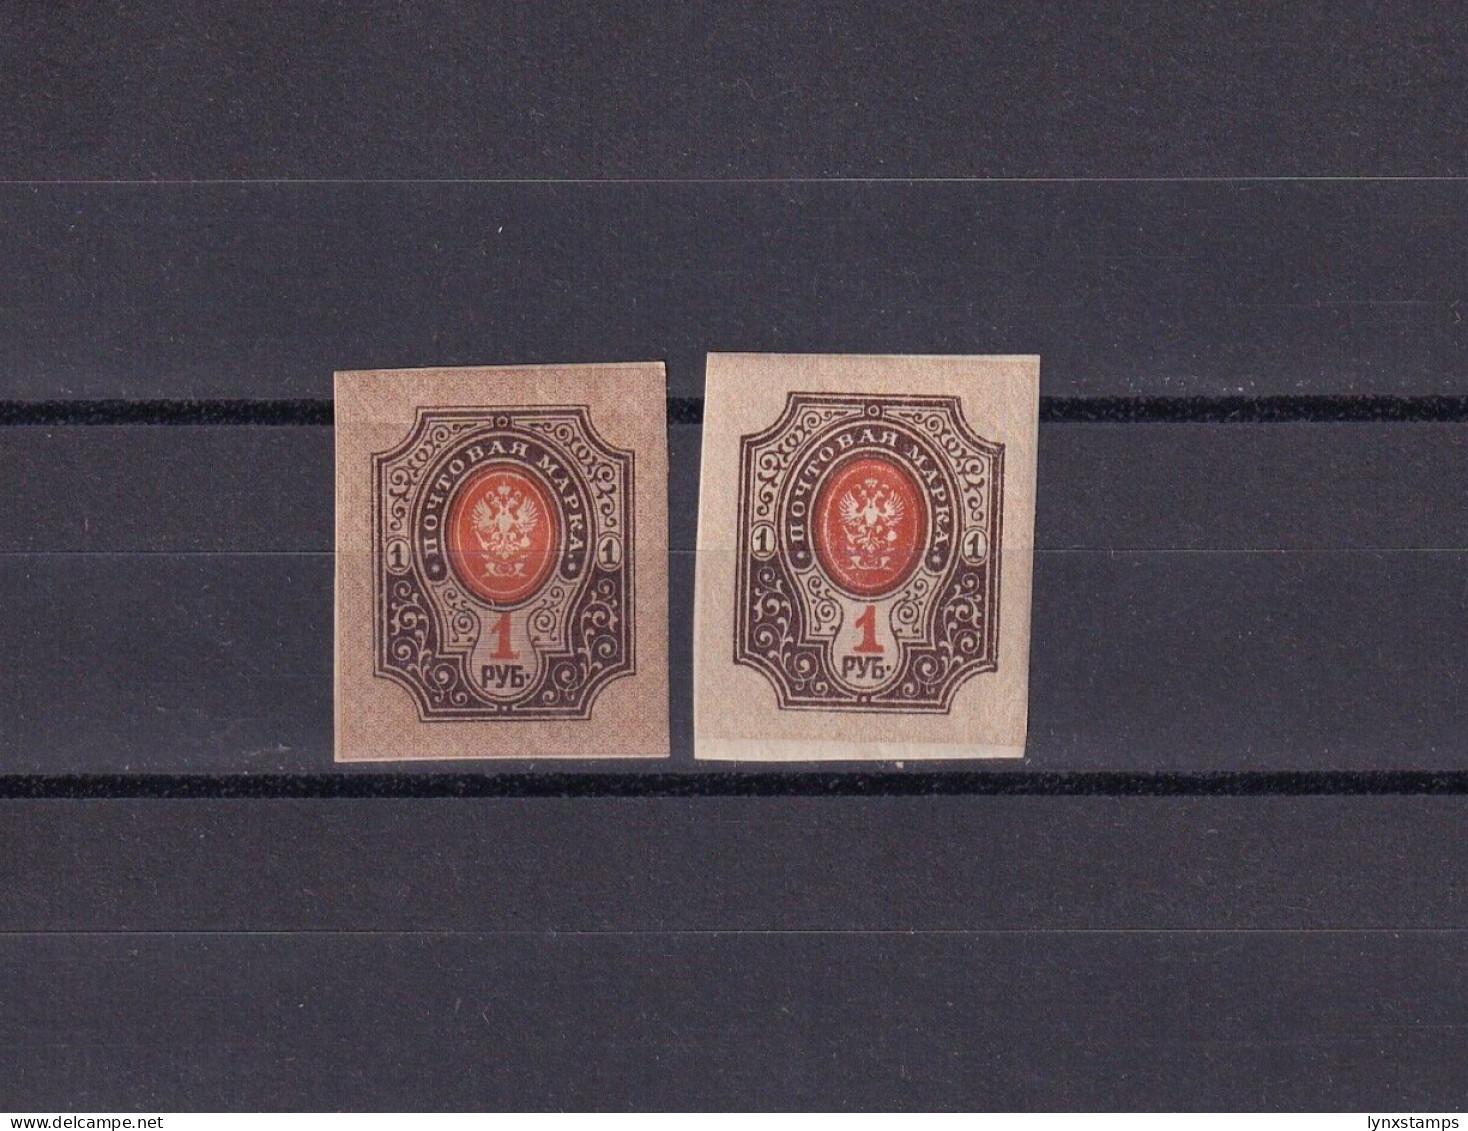 SA05 Russia 1917 Coat Or Arms Mint Hinged - Unused Stamps